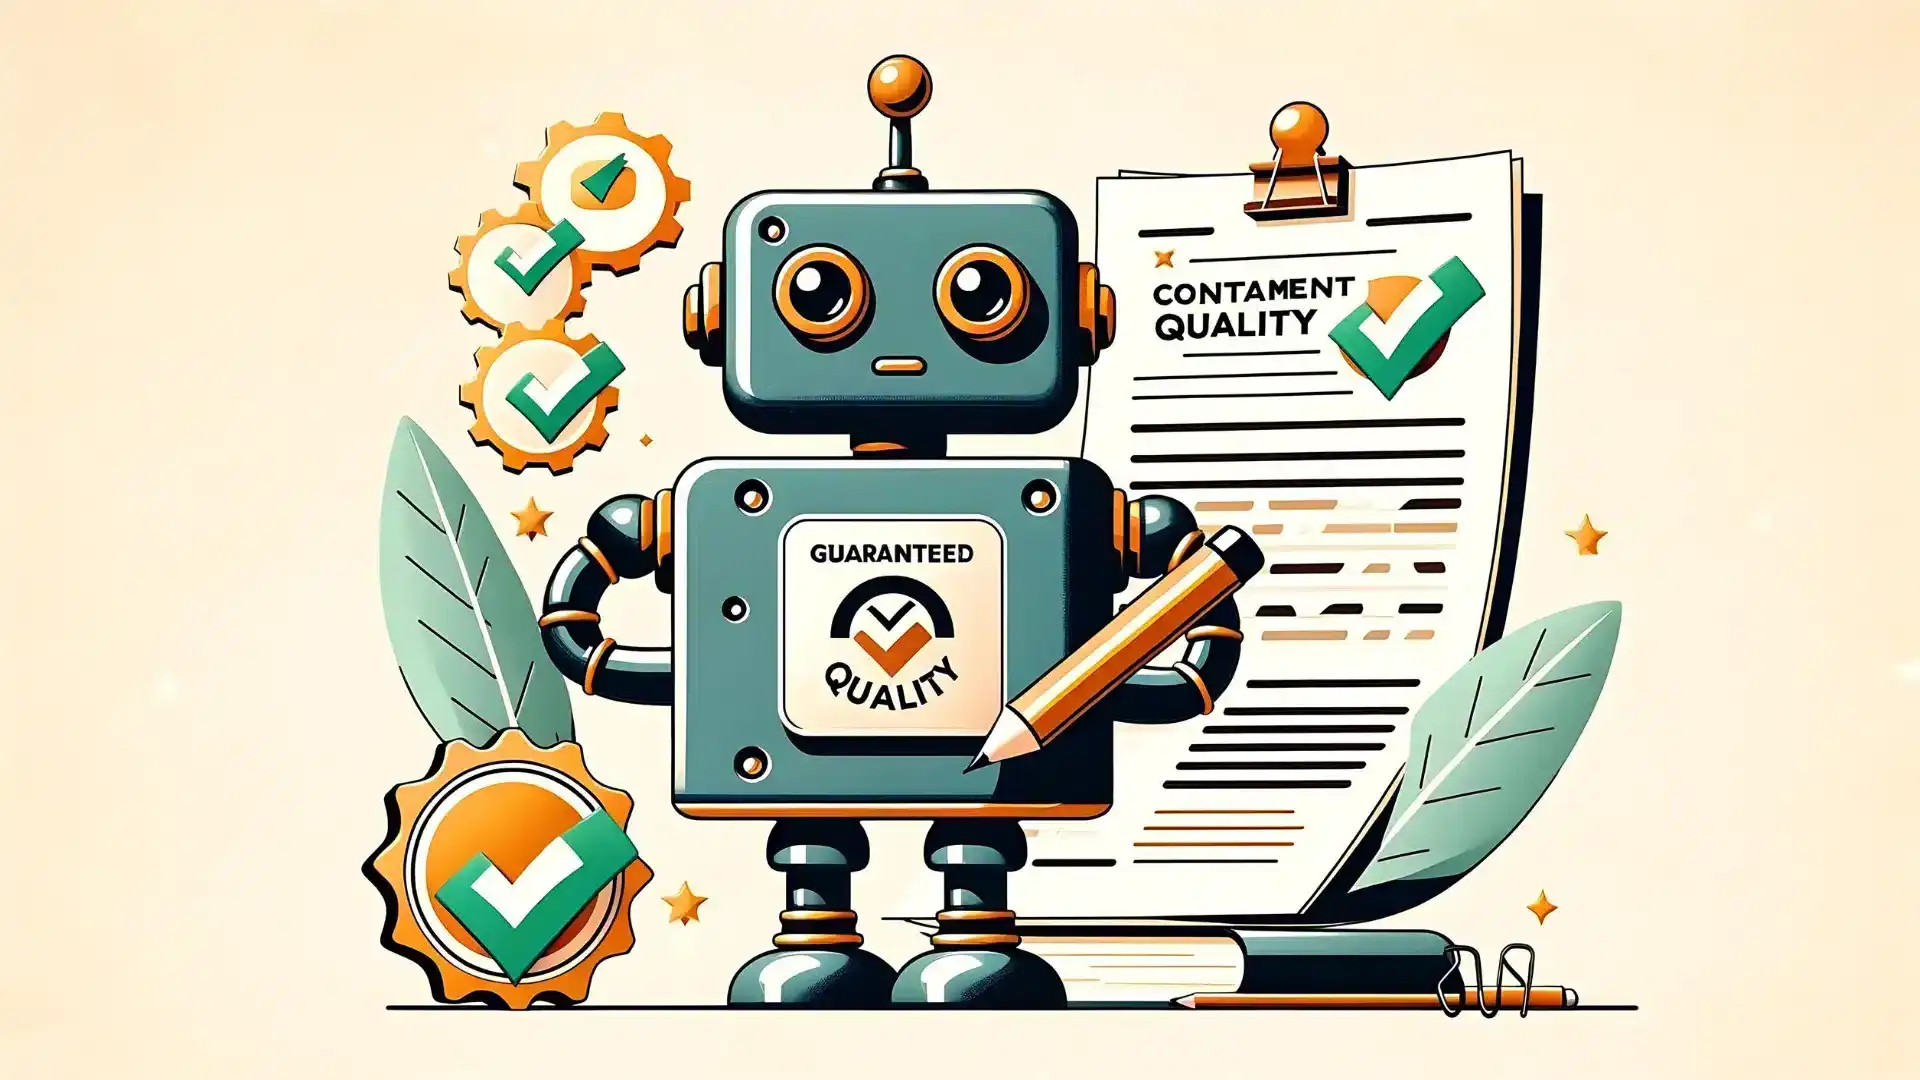 InkBot with Quality Guarantee Stamp and Checklist for Premium Content